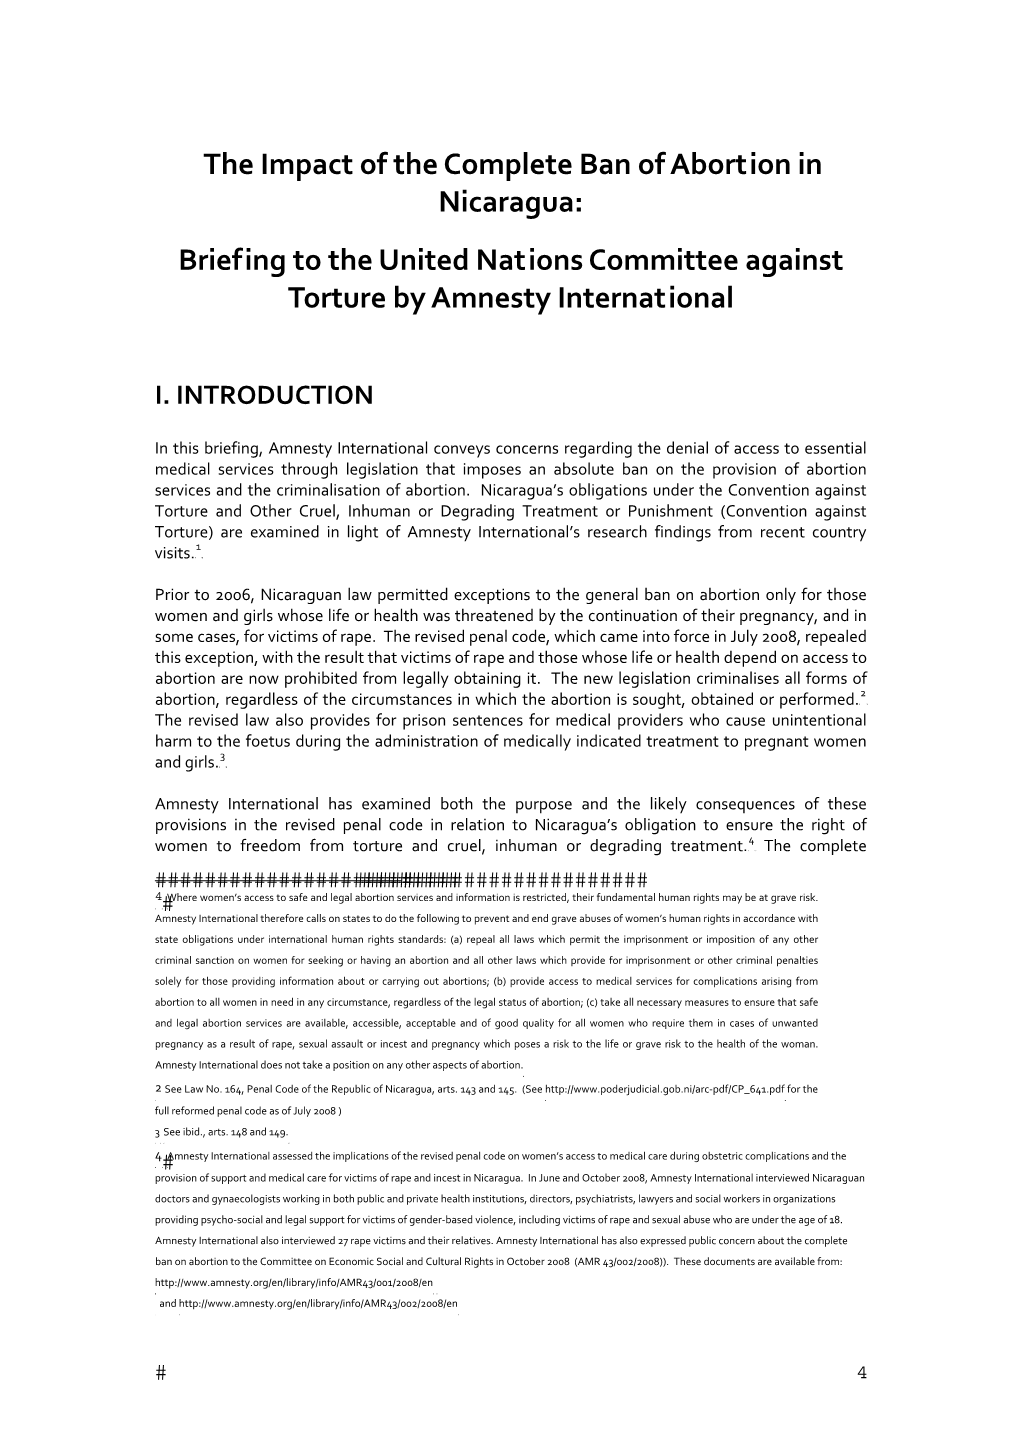 The Impact of the Complete Ban of Abortion in Nicaragua: Briefing to the United Nations Committee Against Torture by Amnesty International